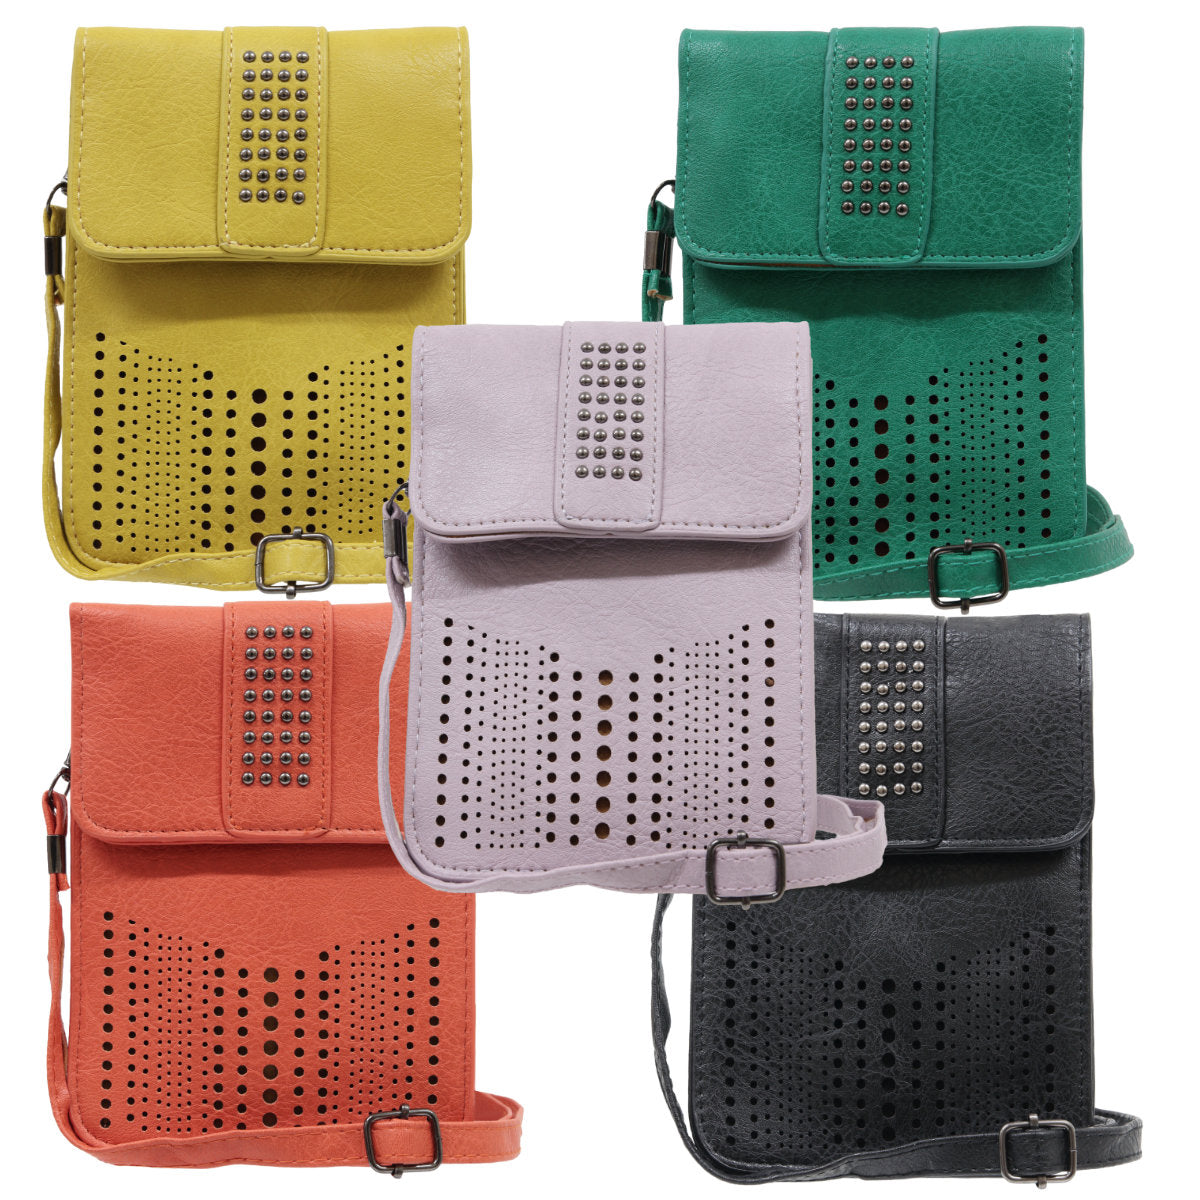 sassy duck amelia cross body pouch bag in mustard, emerald green, pink, orange and black